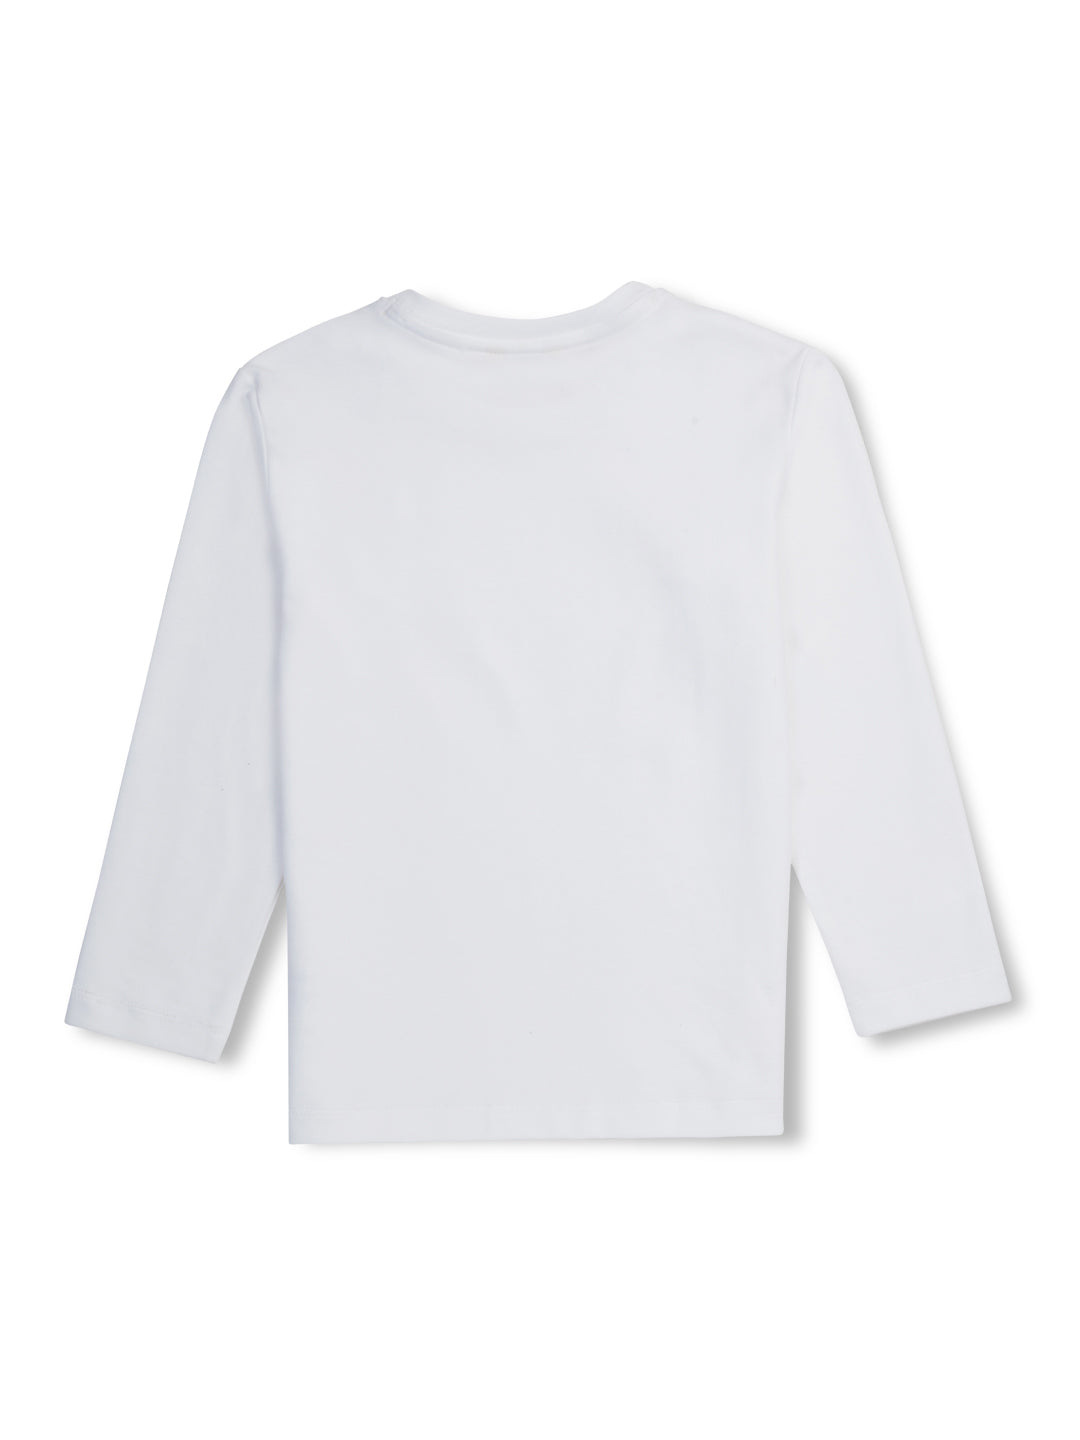 Girls White Solid Cotton T-Shirt